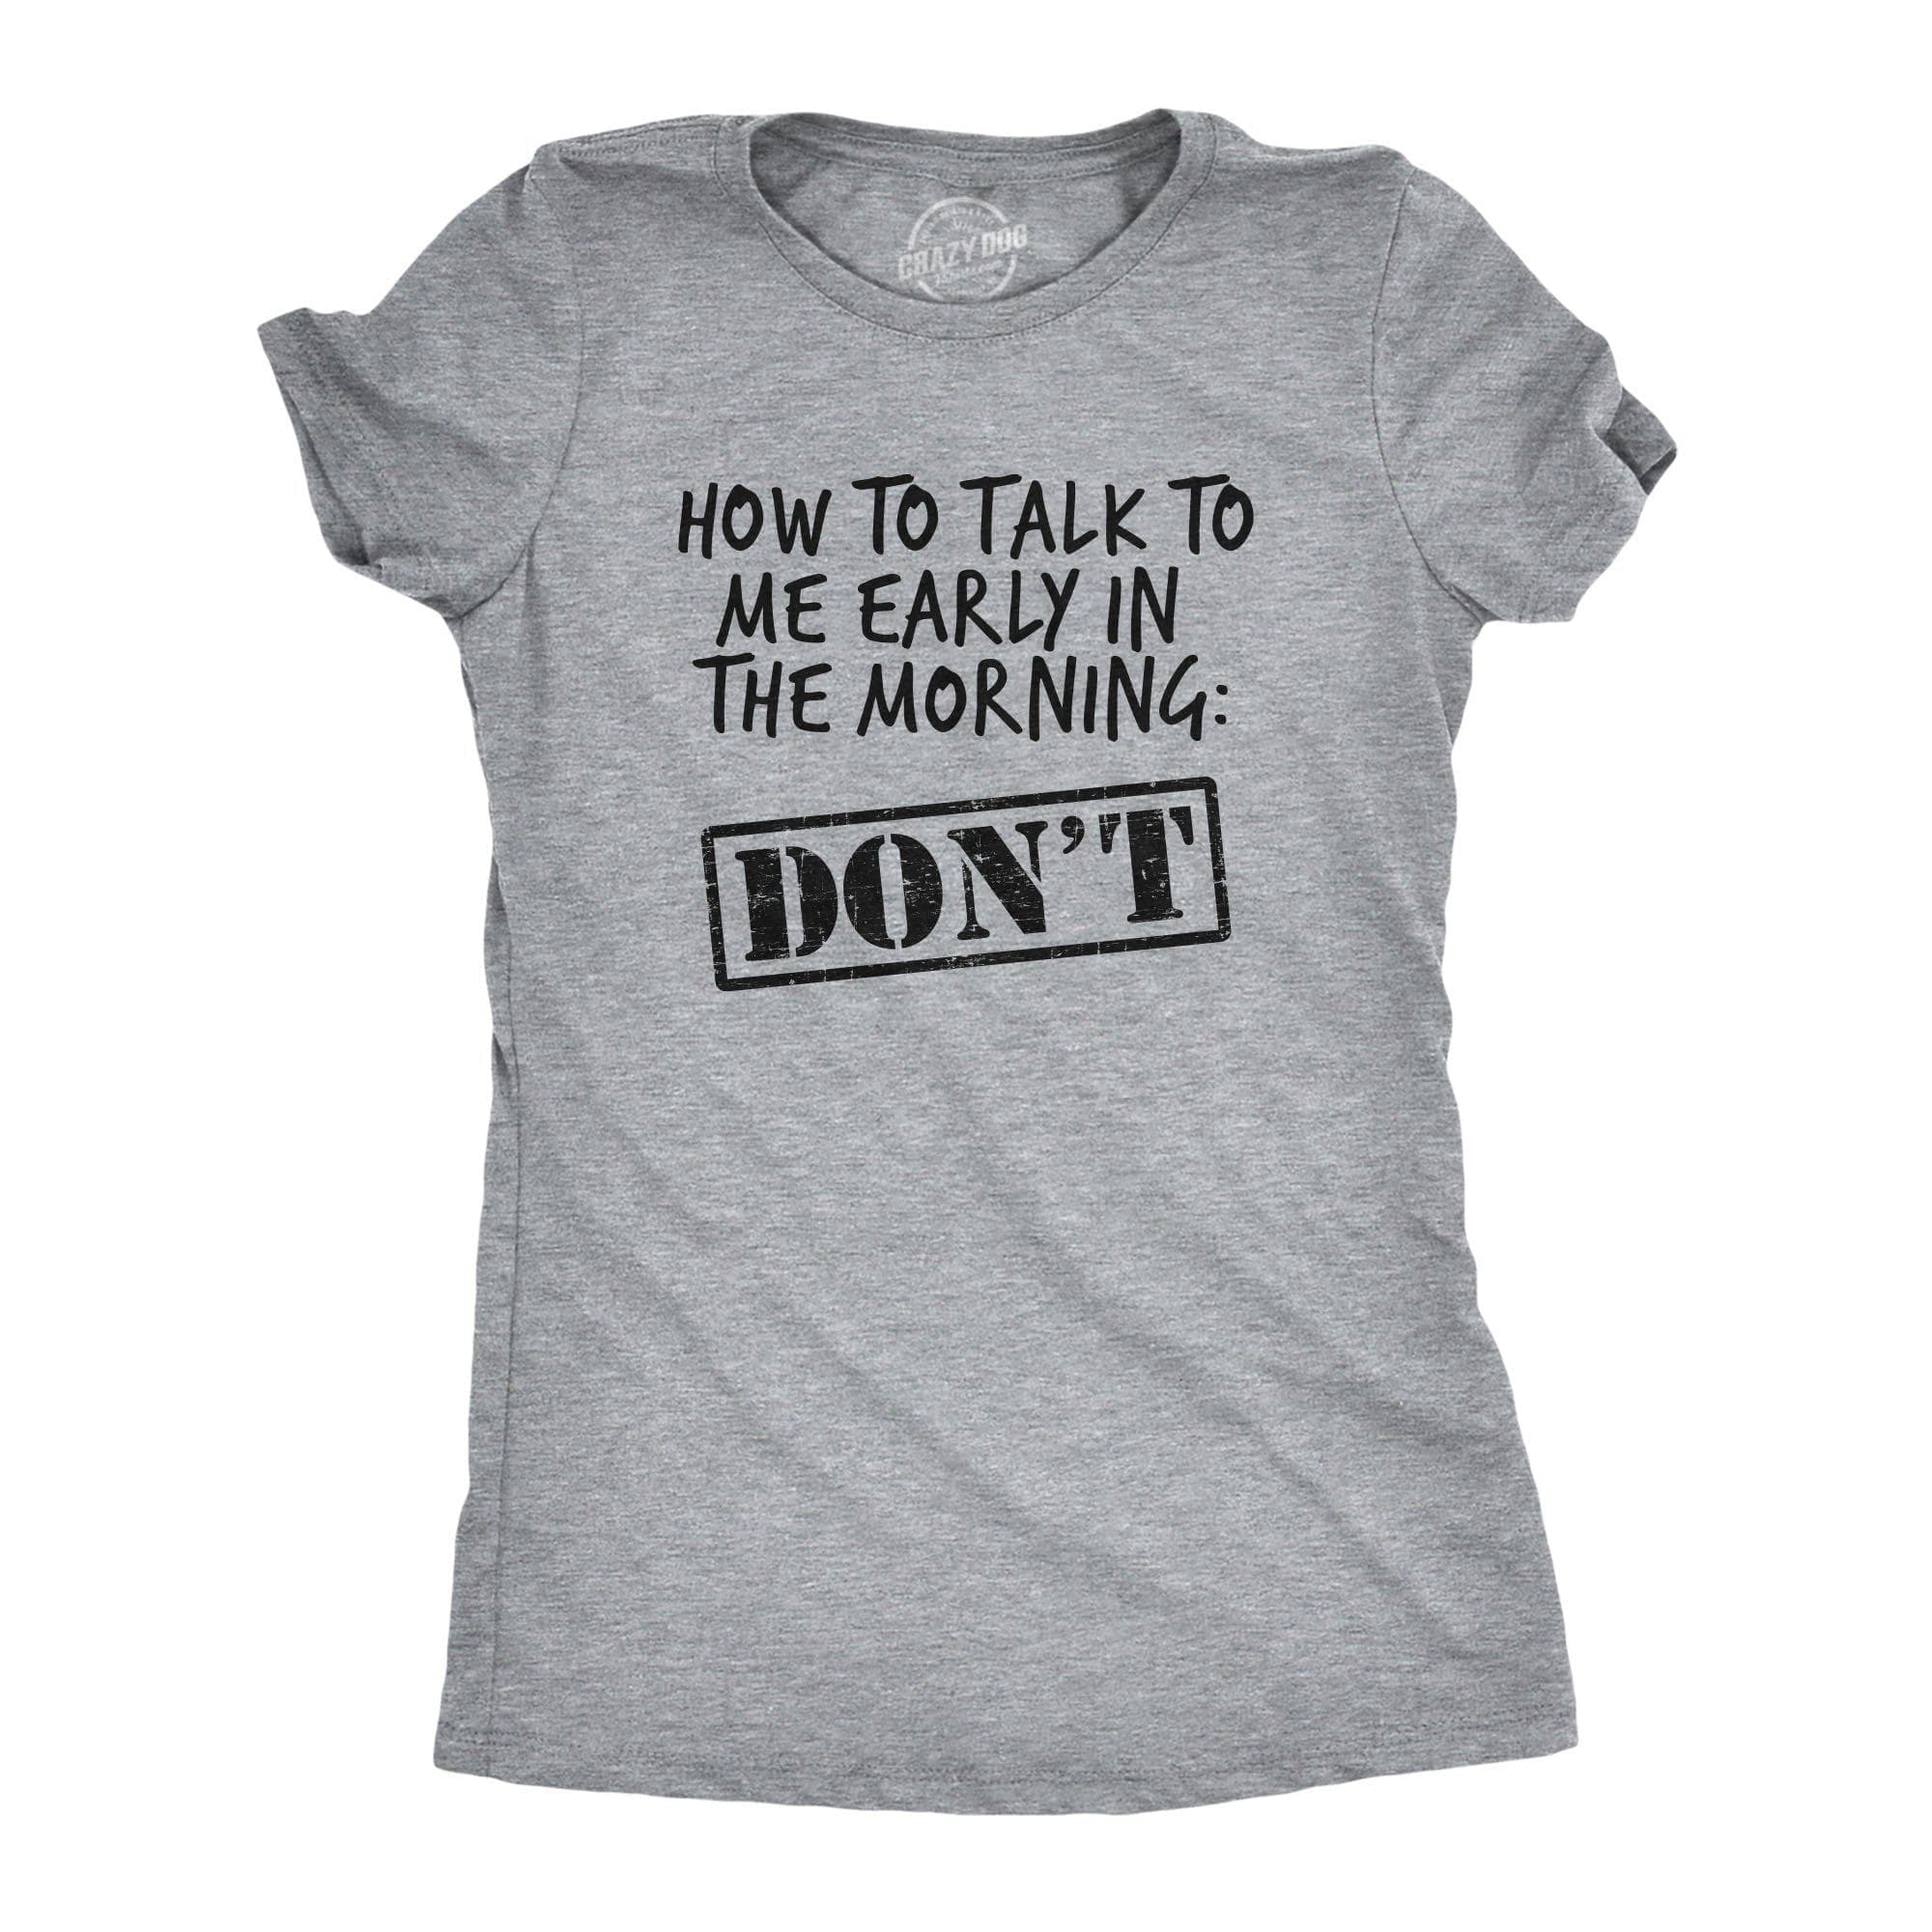 How To Talk To Me Early In The Morning Women's Tshirt - Crazy Dog T-Shirts